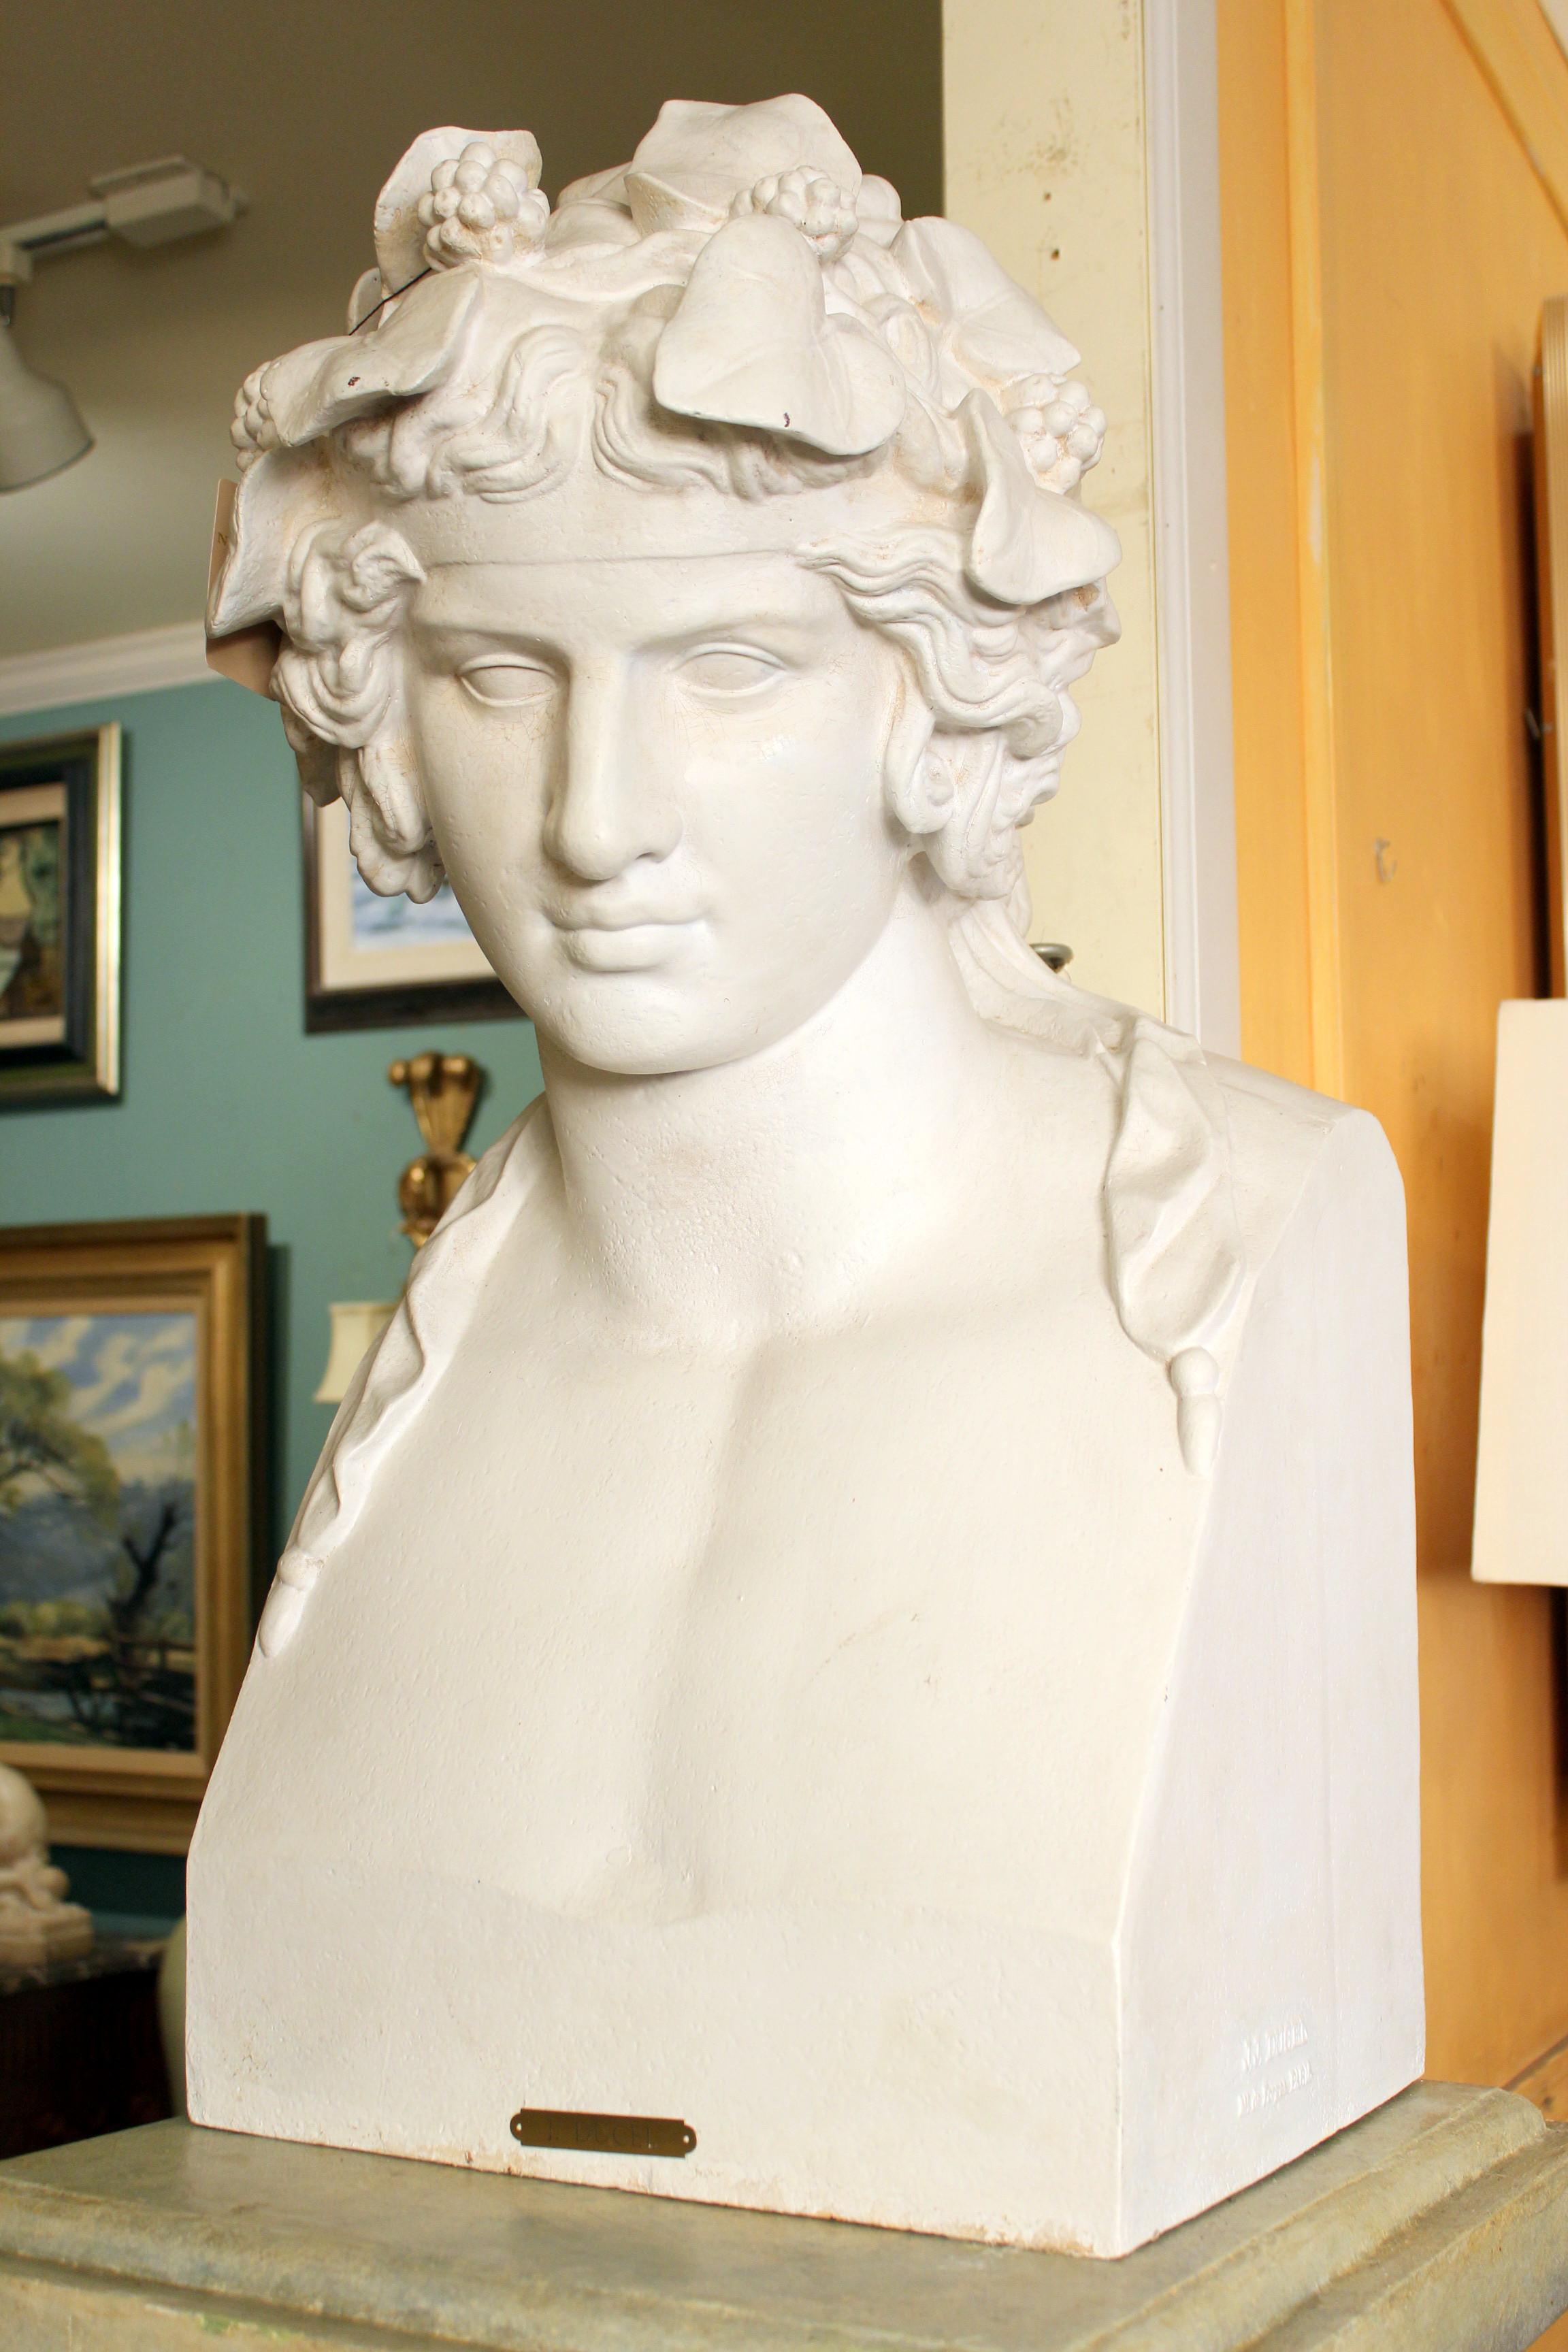 19th century painted cast iron and  bust by noted Parisian foundry and retailer J.J. Ducel (1810-1878) and painted faux marble pedestal. The painted pedestal was made in the U.S. circa 1990. Dimensions of cast iron bust, height 29